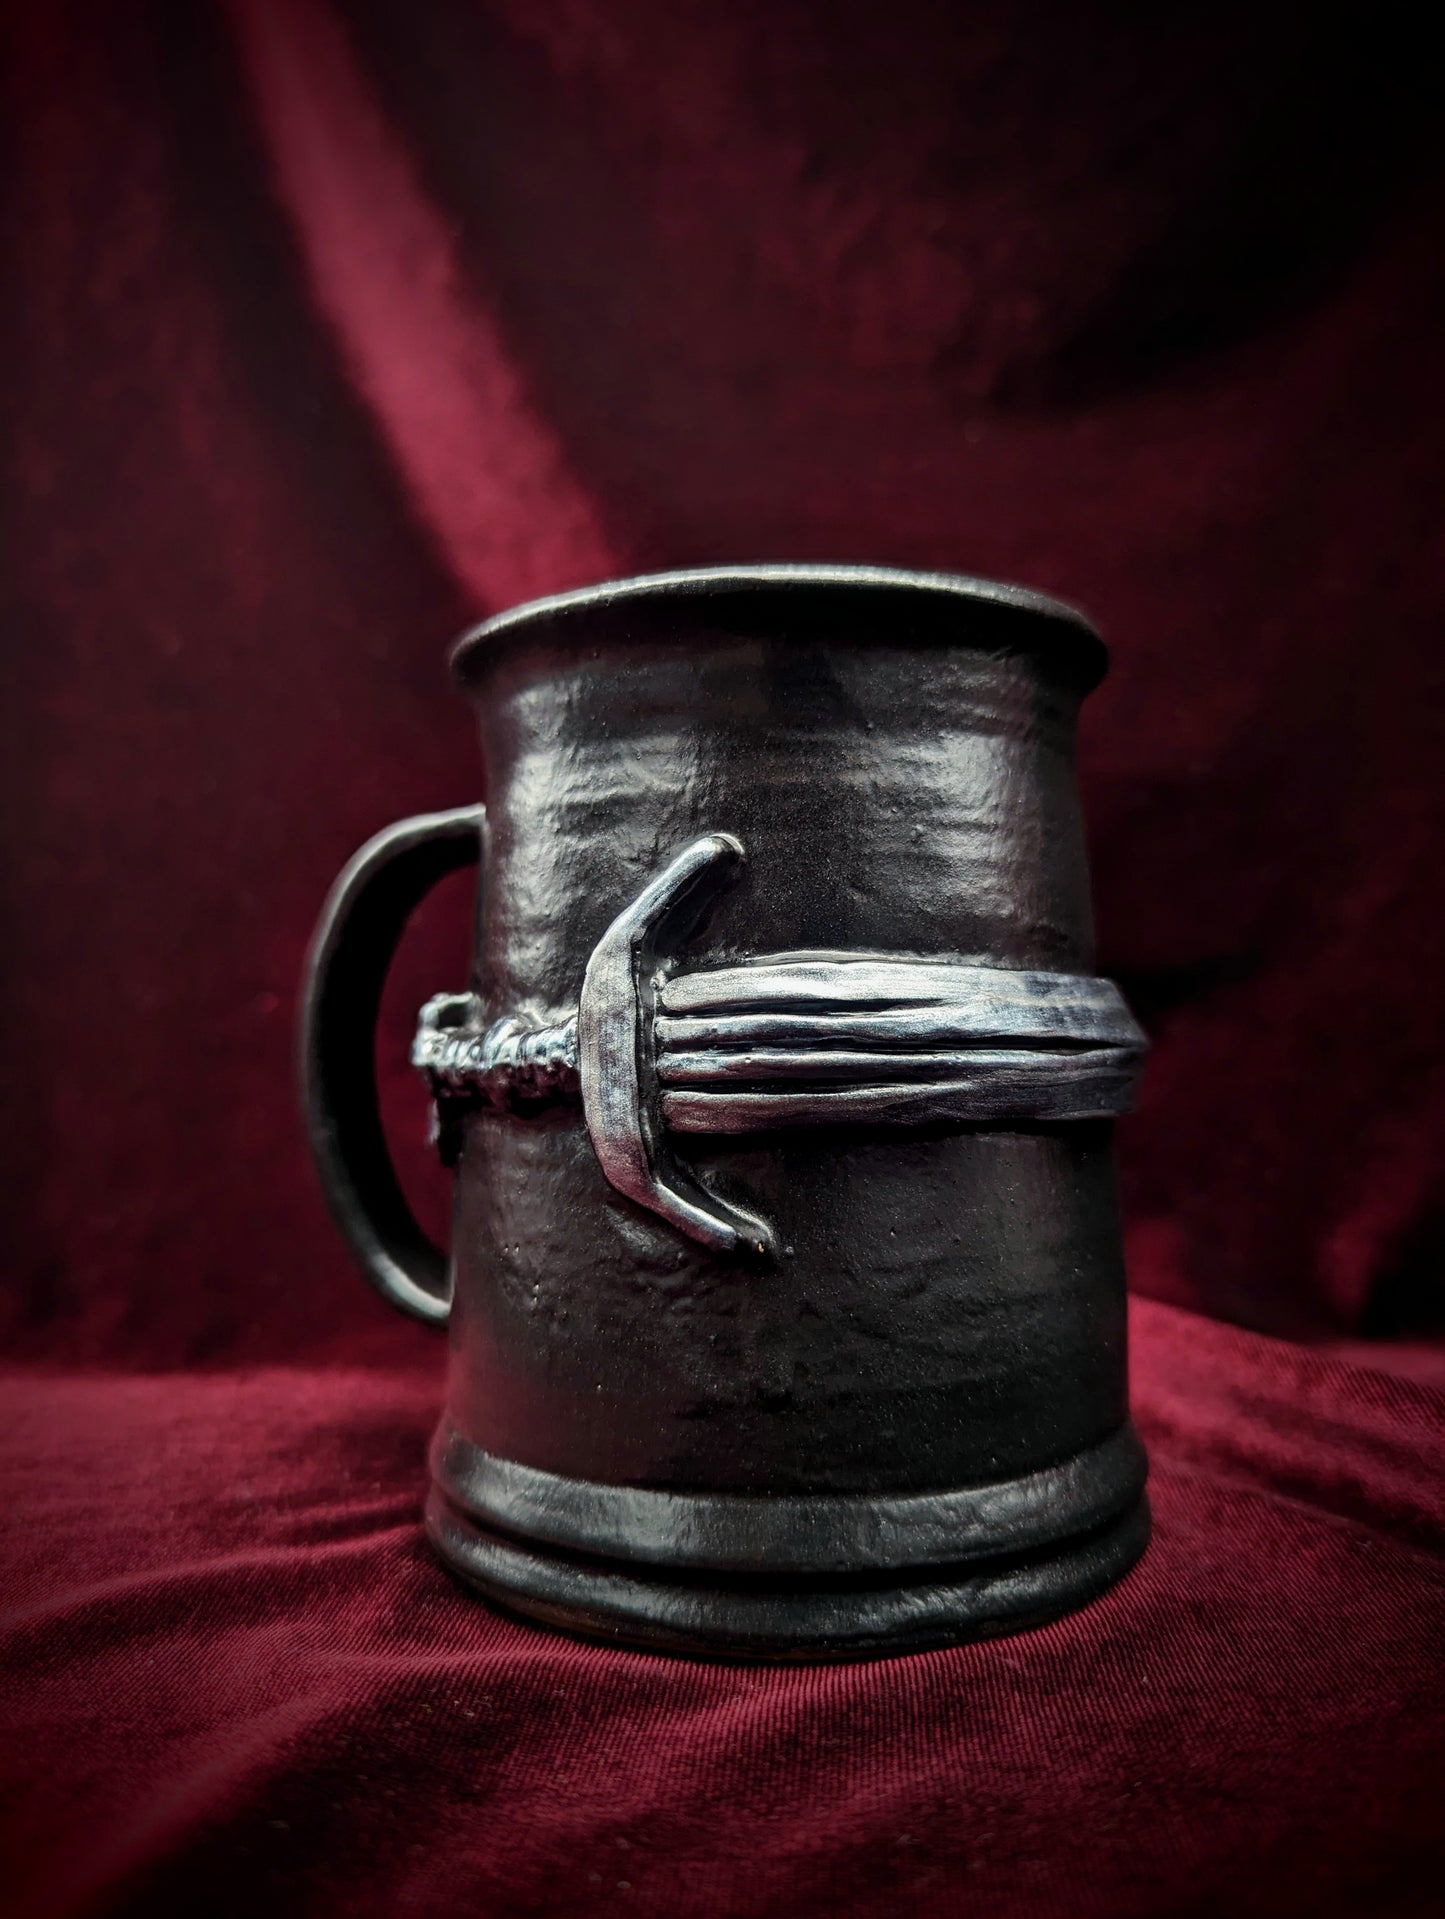 Silver Sword Witcher Mug - Black Cast Iron Look with Silver